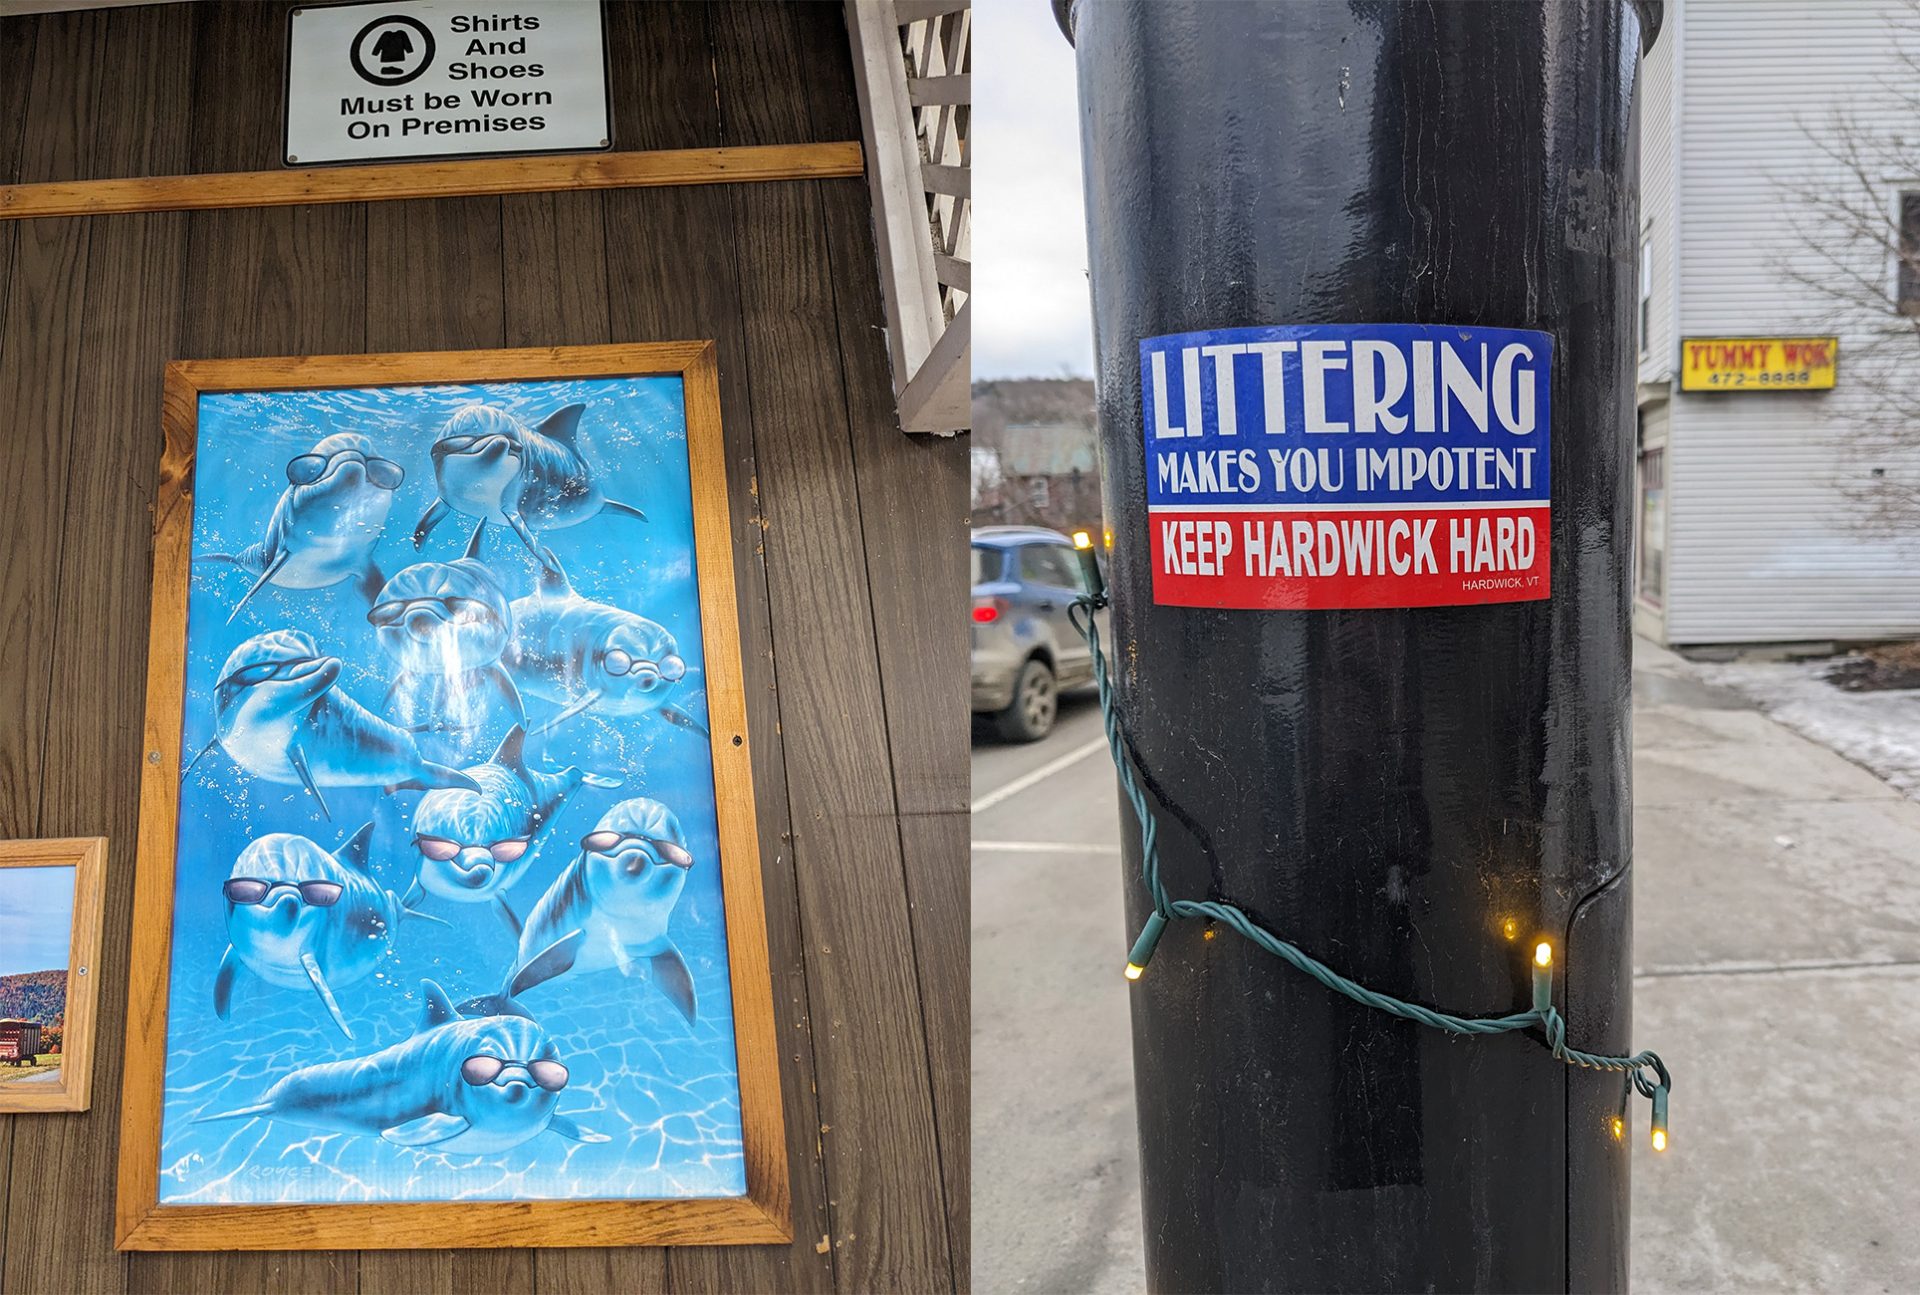 Dolphin photo and littering sticker in Hardwick, VT.